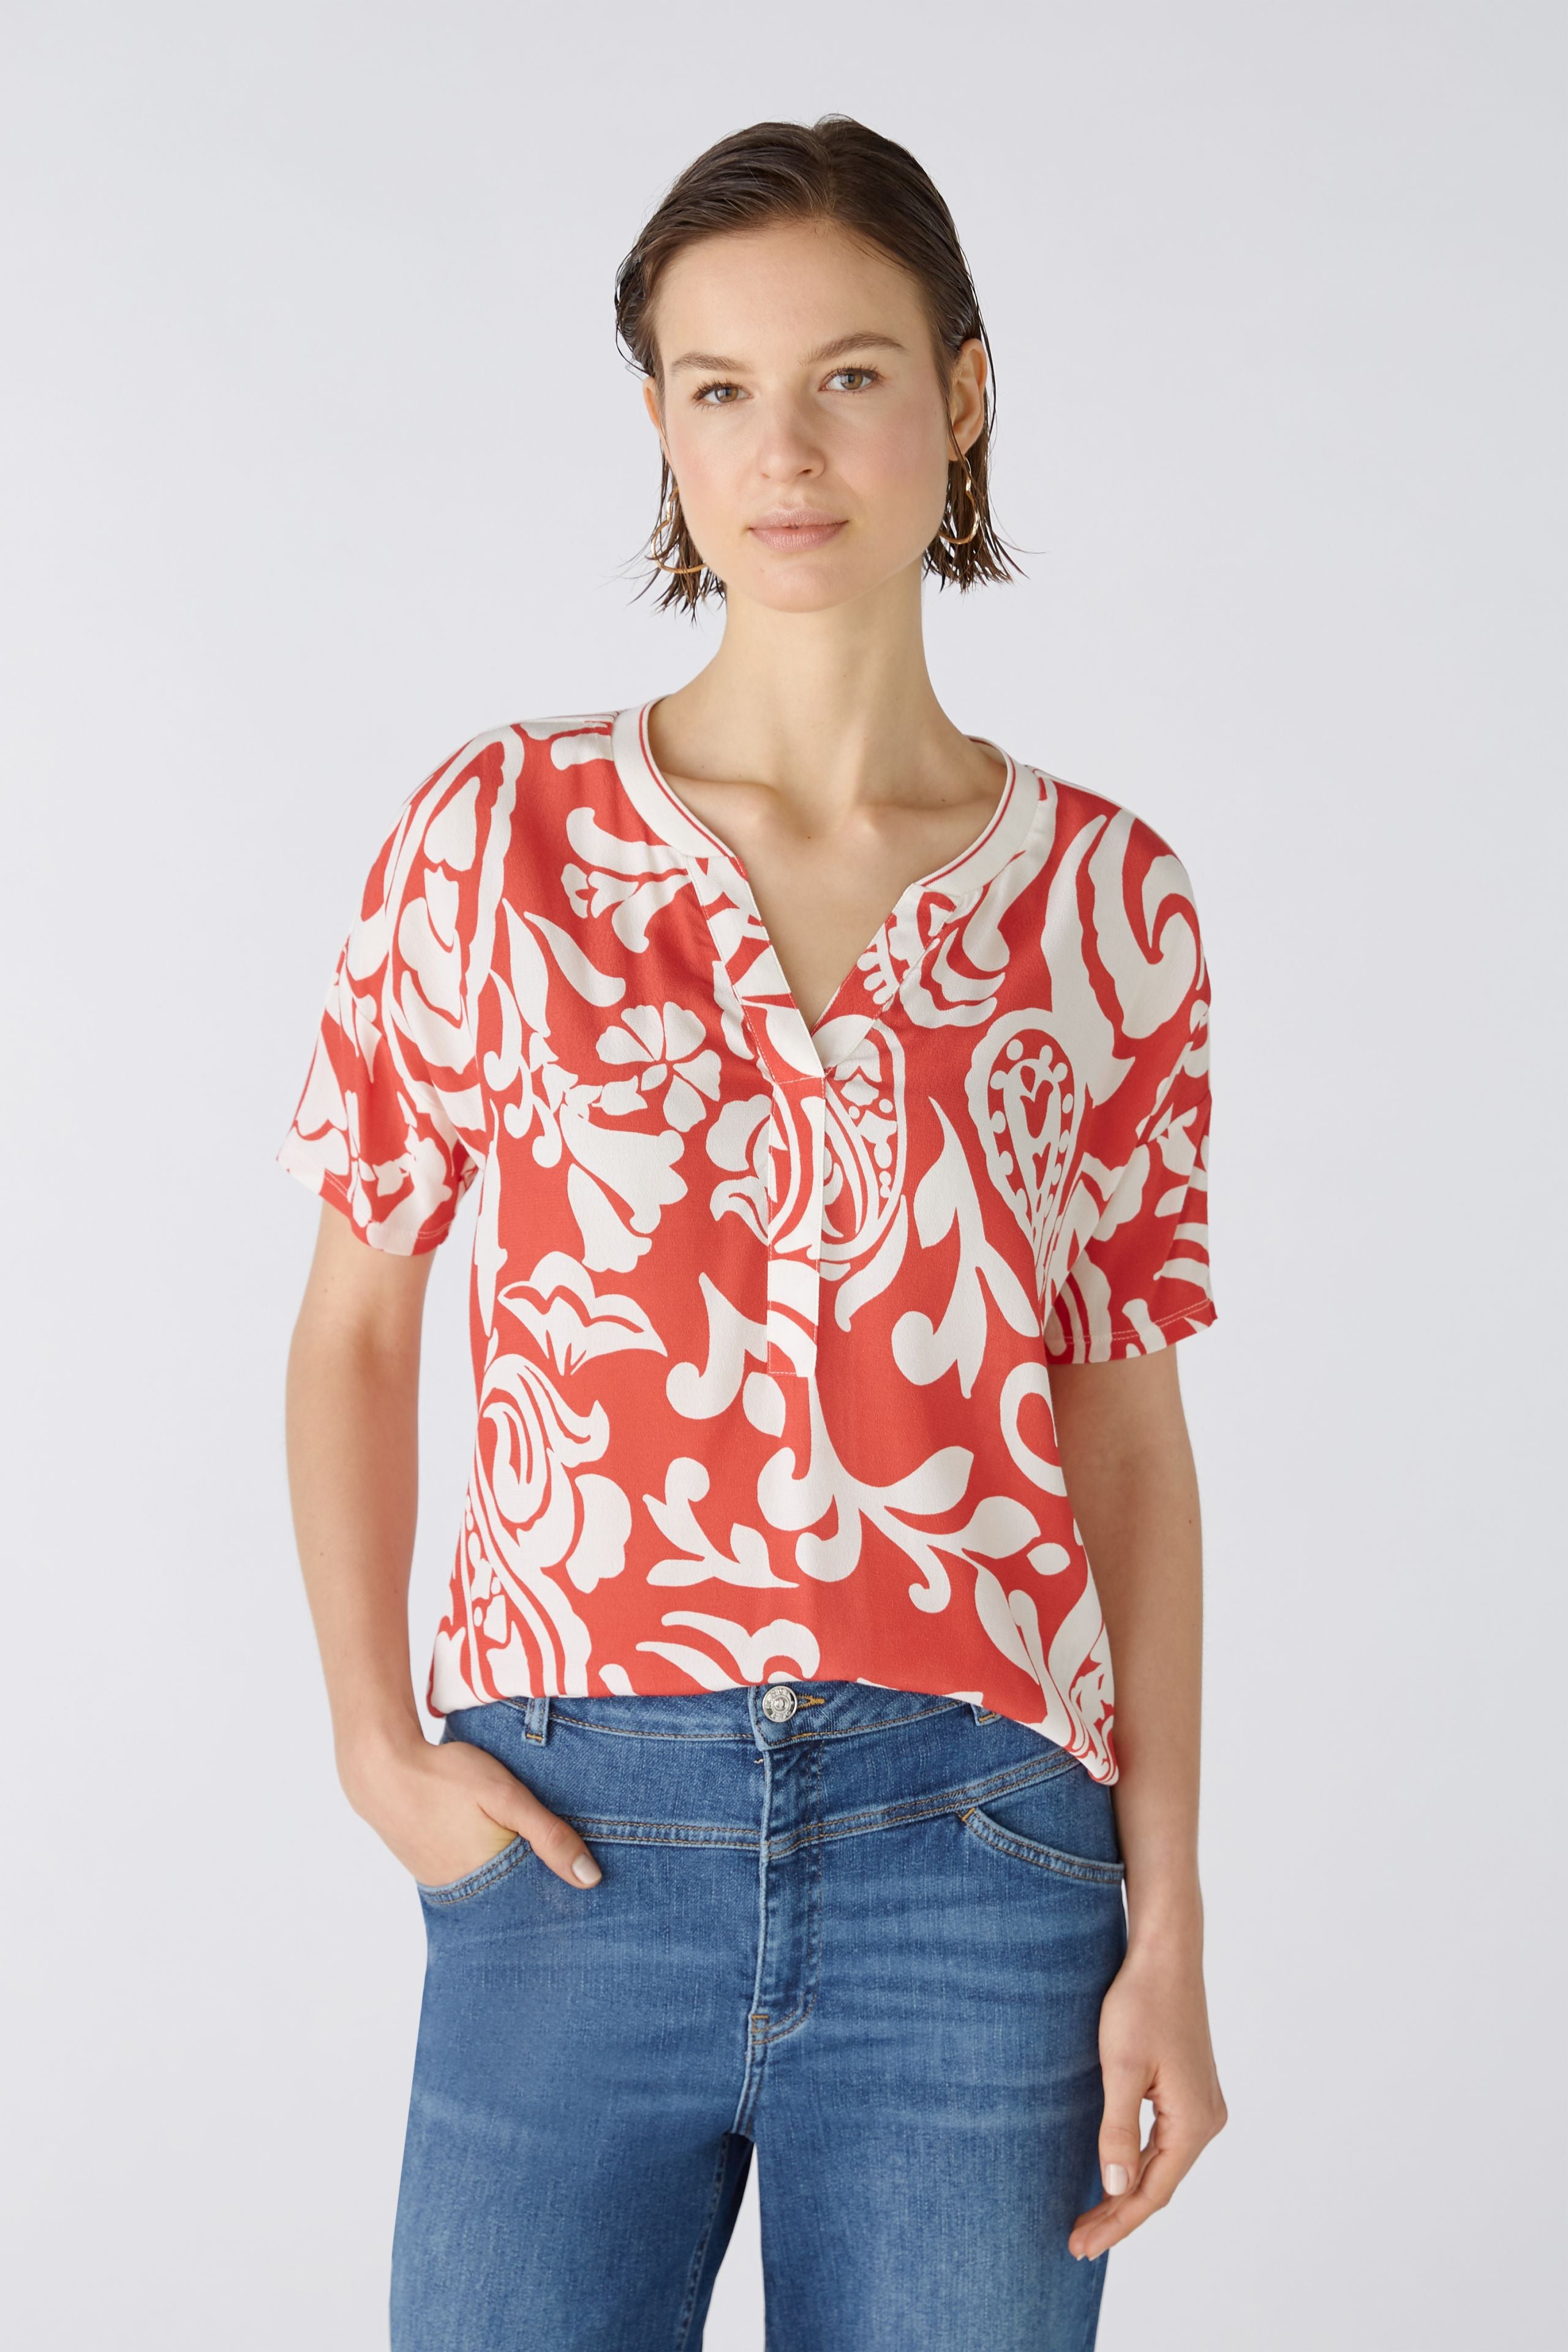 Short Sleeve Floral Blouse in Red/White